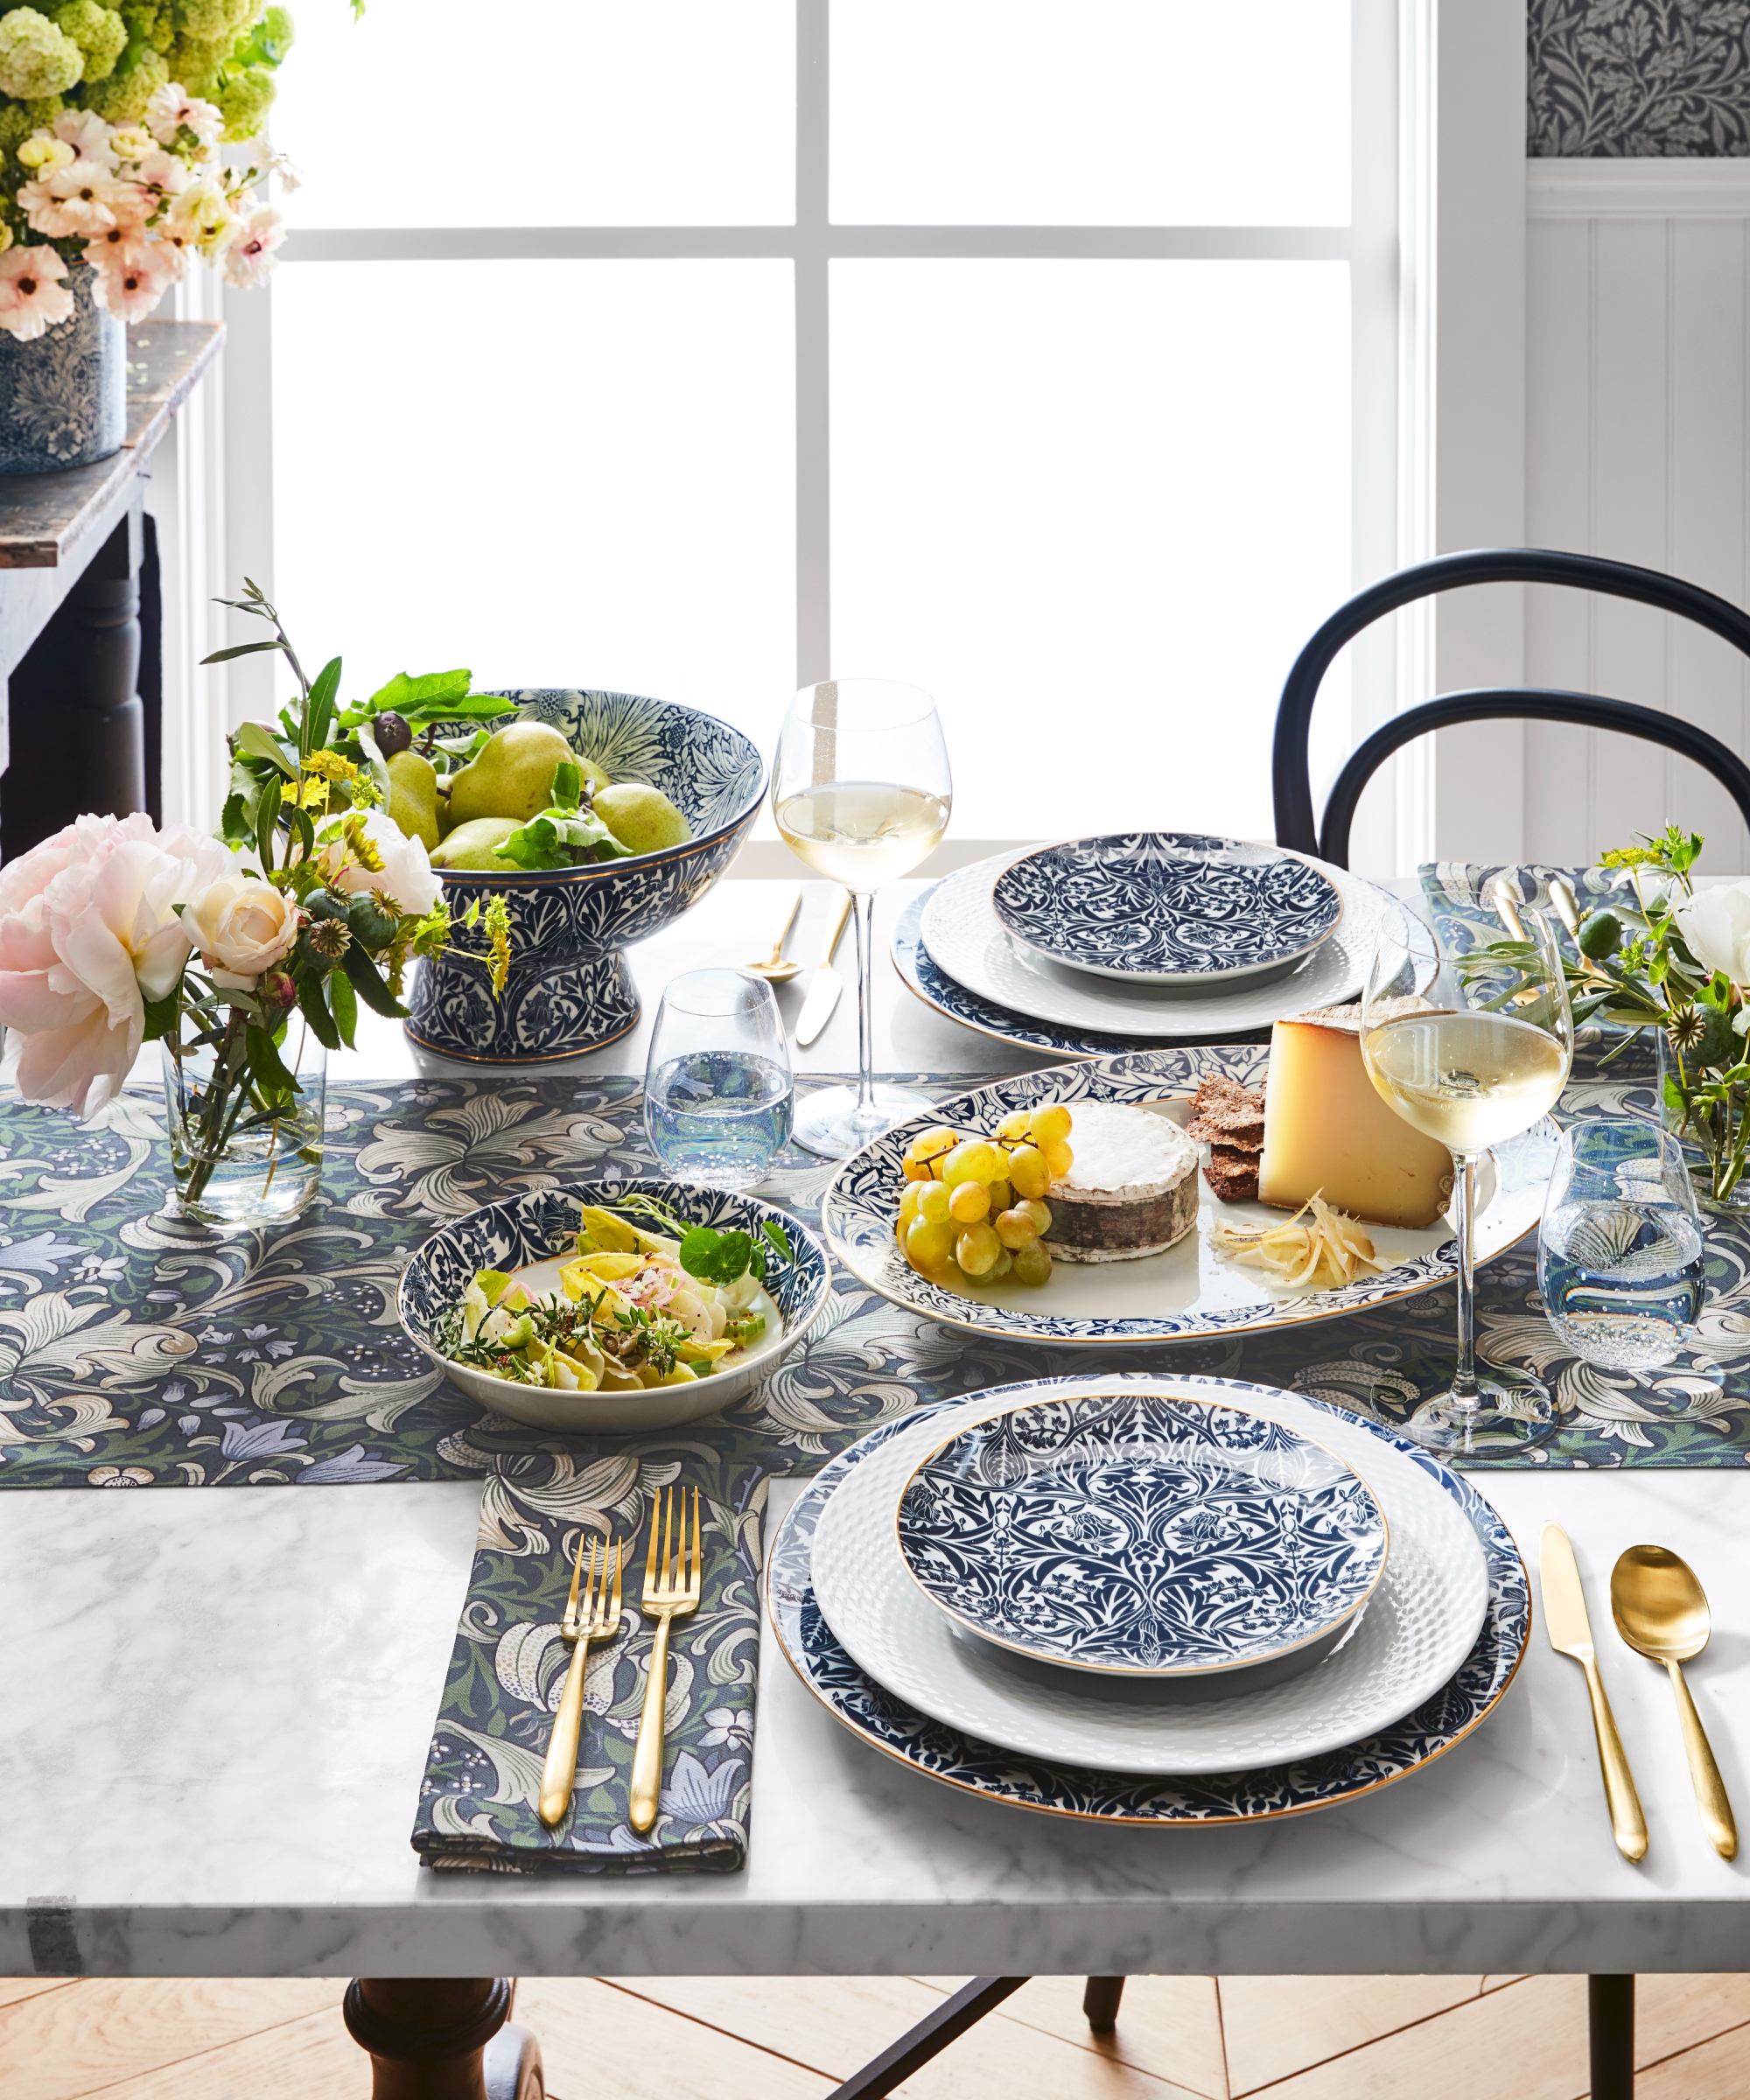 Morris & Co’s collection for Williams Sonoma has arrived | Homes & Gardens